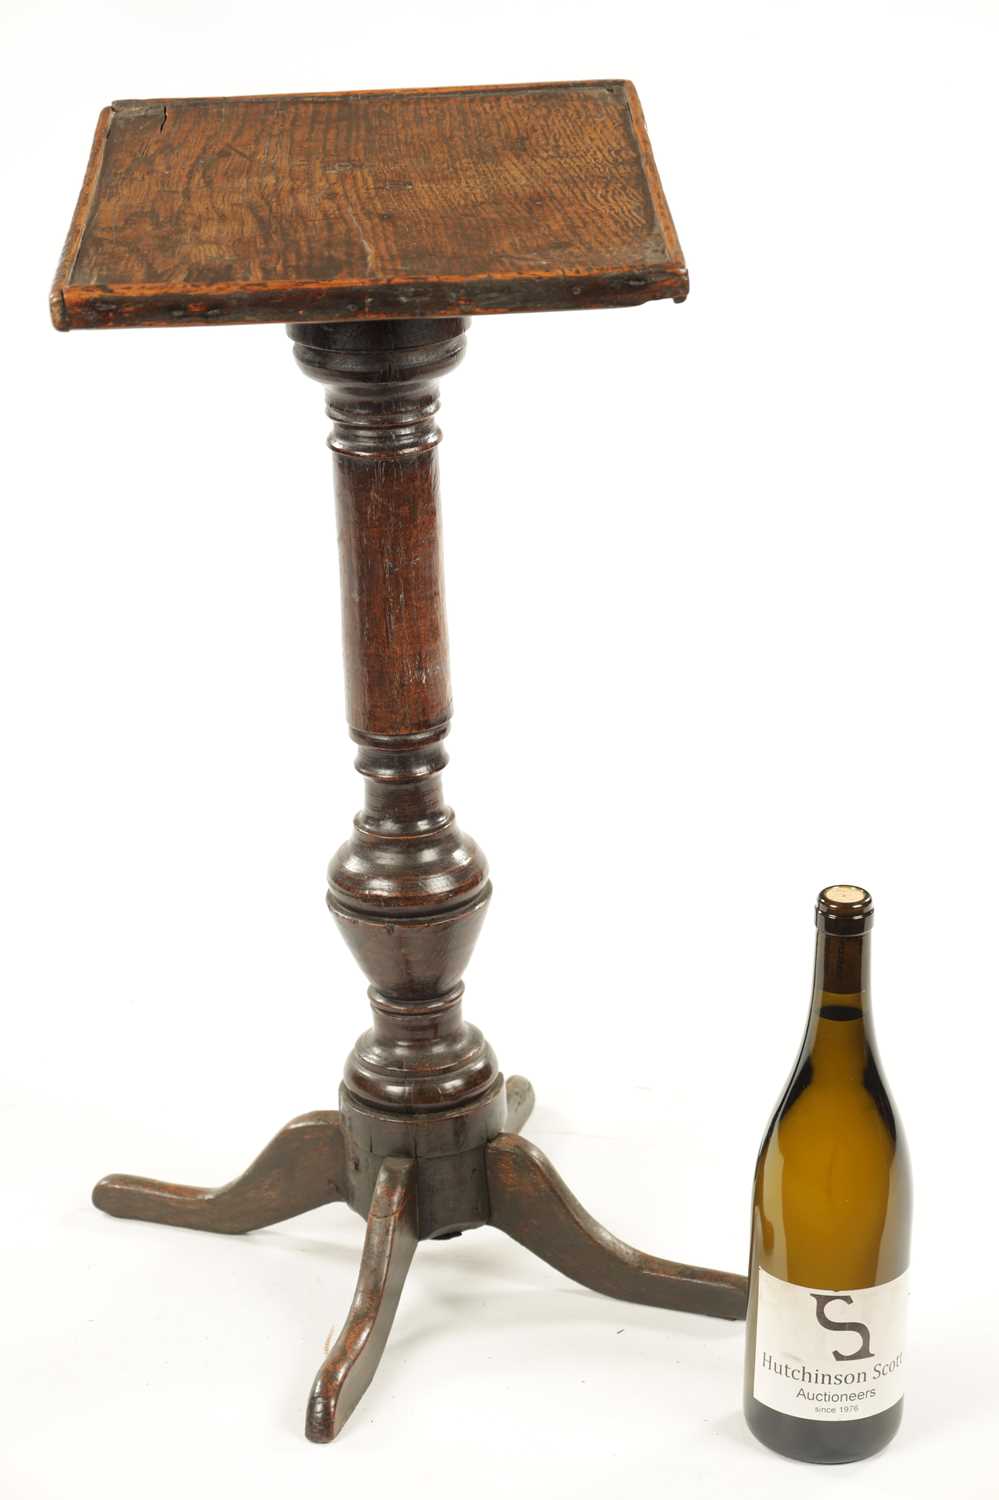 AN 18TH CENTURY PRIMITIVE OAK FOUR-LEGGED CANDLE TABLE - Image 4 of 5